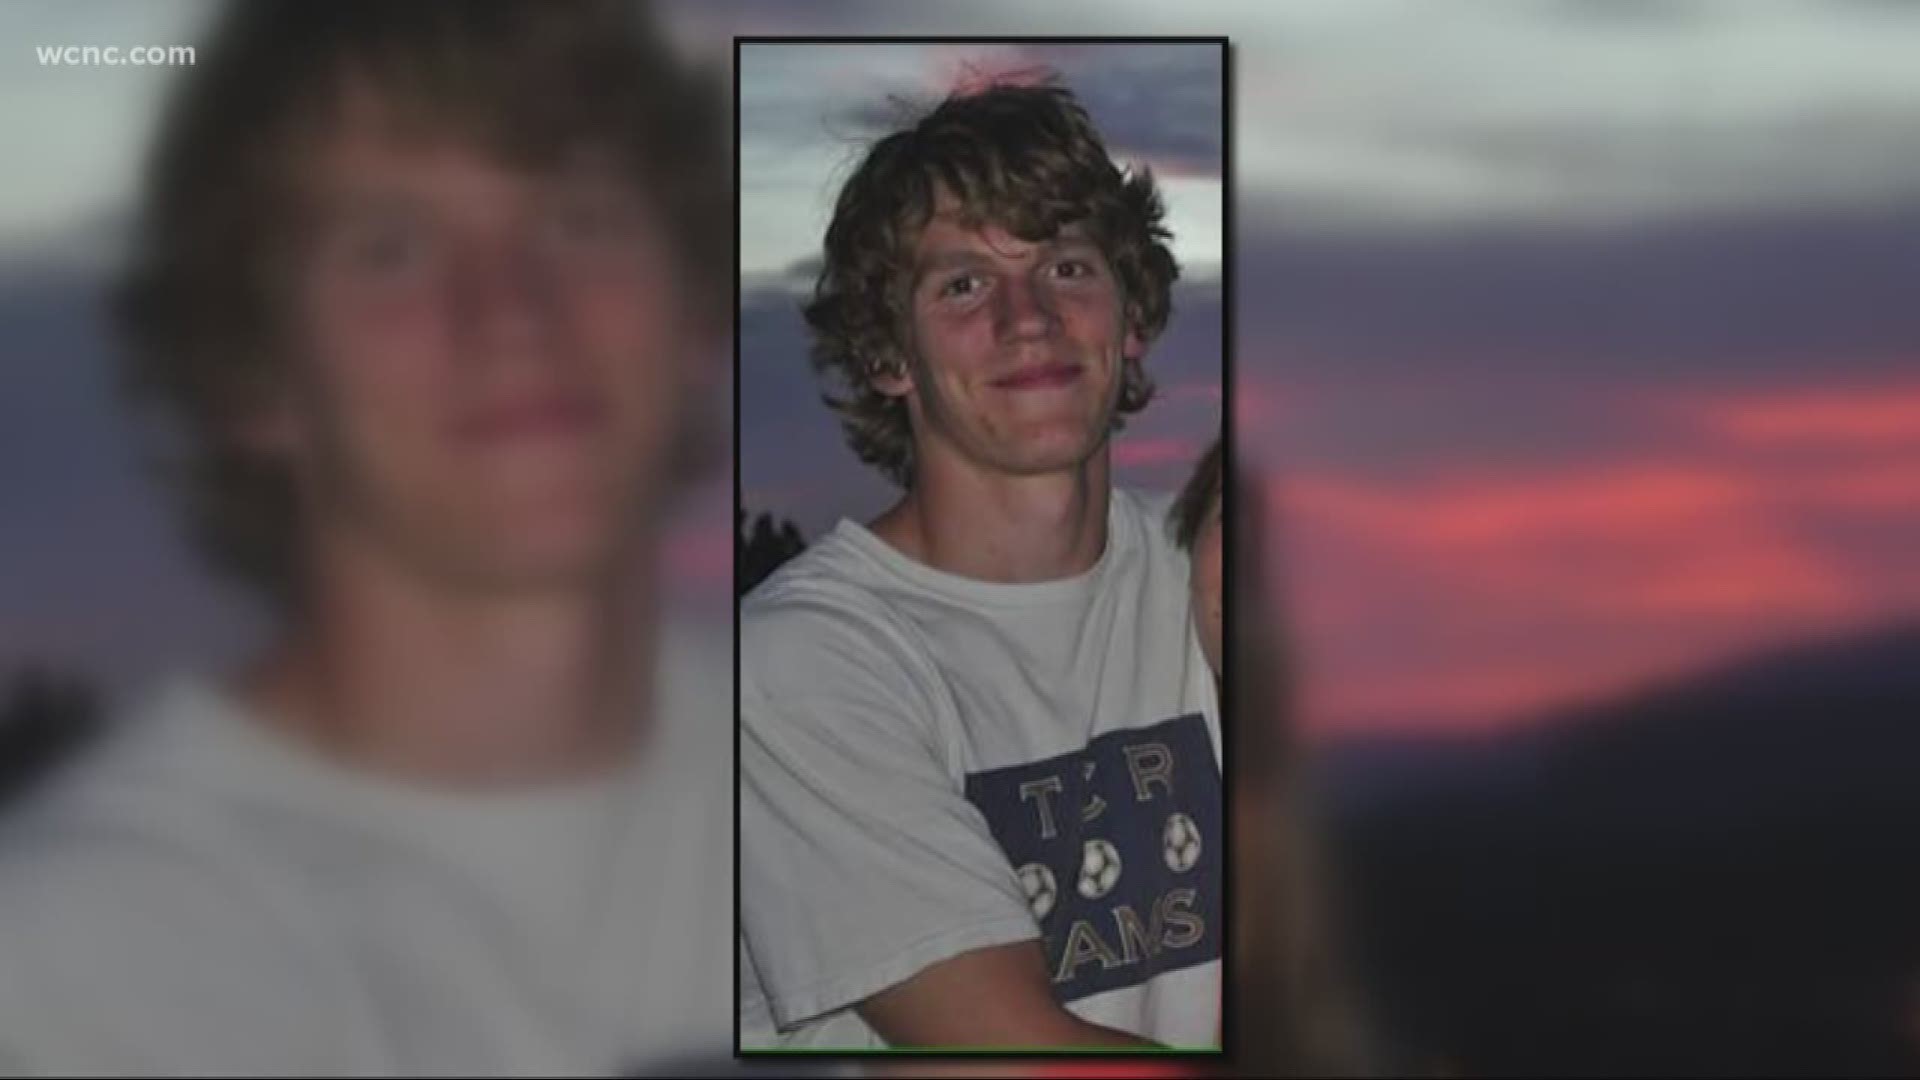 Family and friends are remembering Riley Howell and Ellis "Reed" Parlier, two UNC Charlotte students killed by a gunman before they could even graudate college.